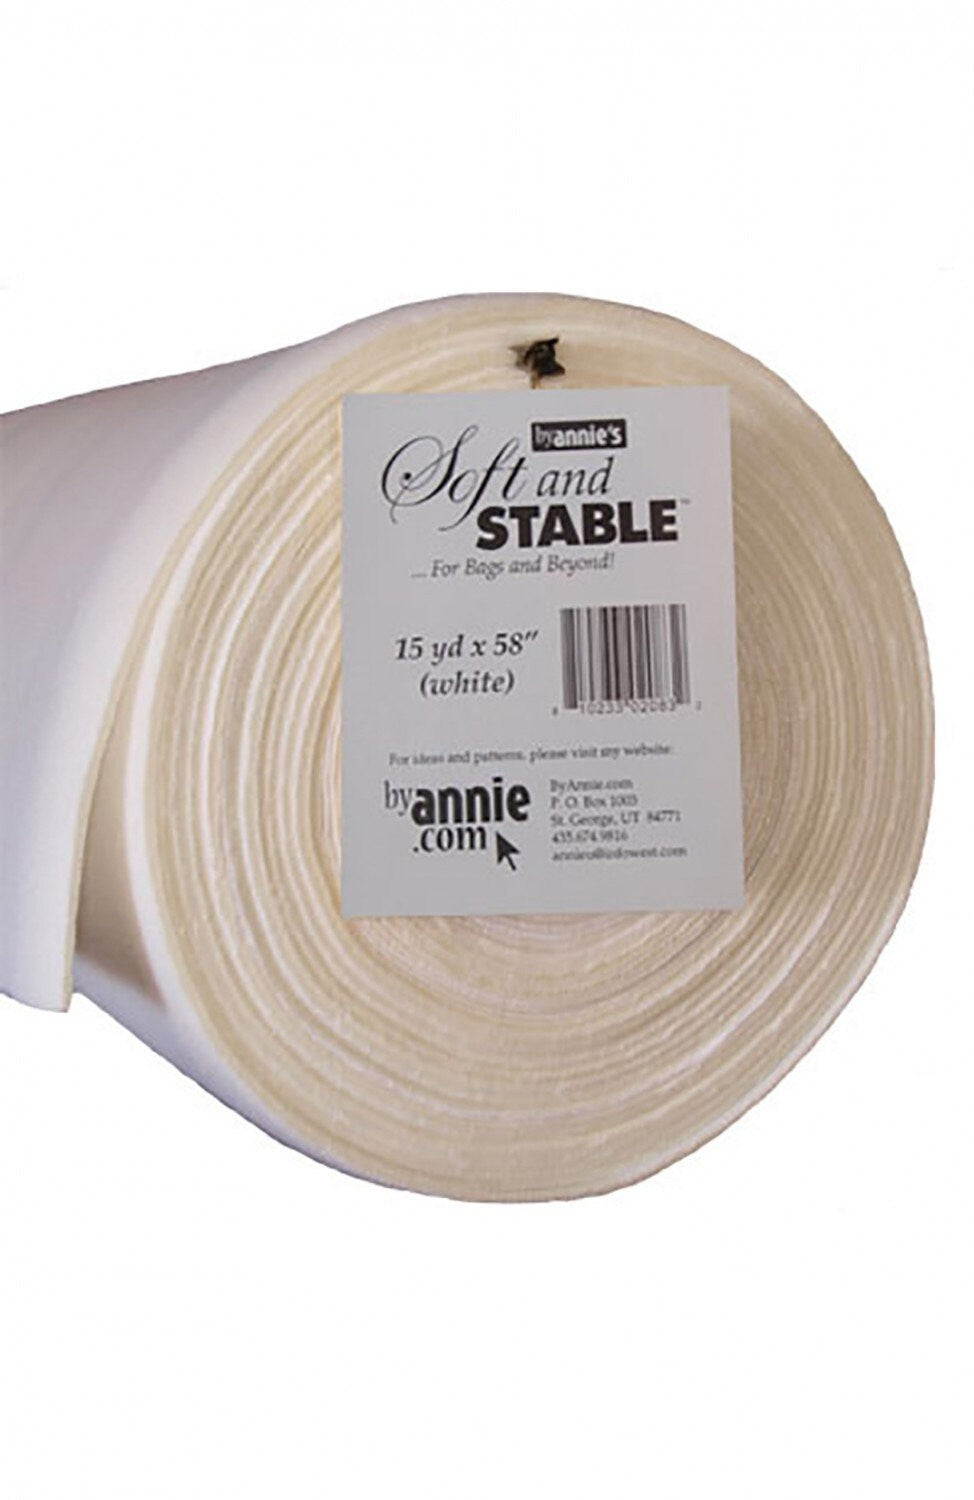 Longarm Quilting Service - ByAnnie Soft and Stable®